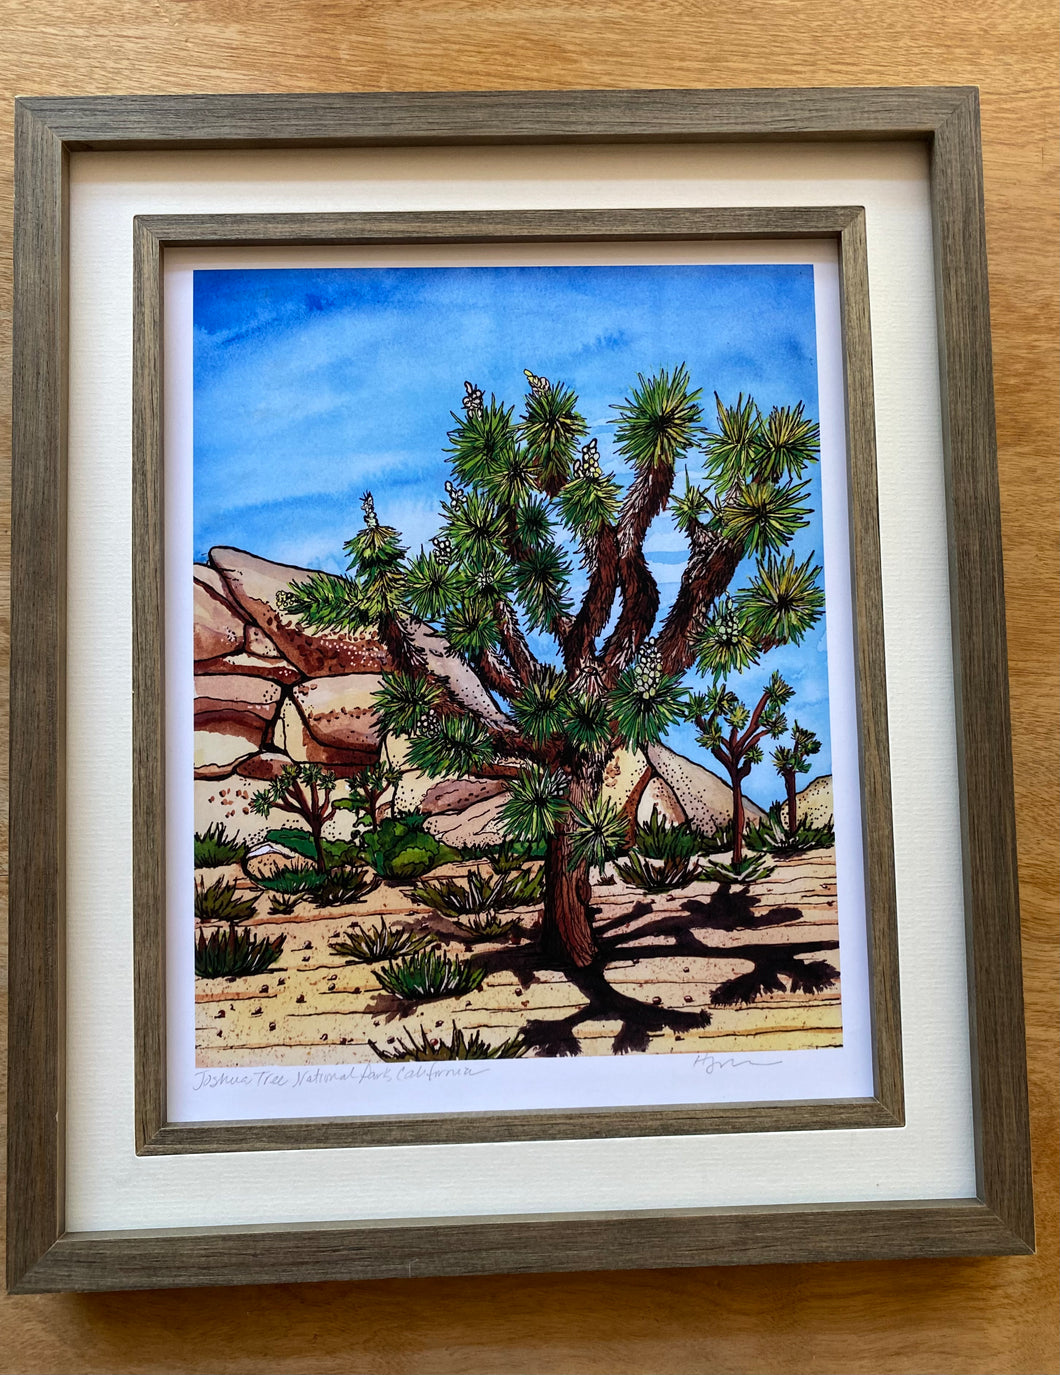 Joshua Tree National Park, California  - Bordered Print- Archival Matte Paper- Hand Titled and Signed